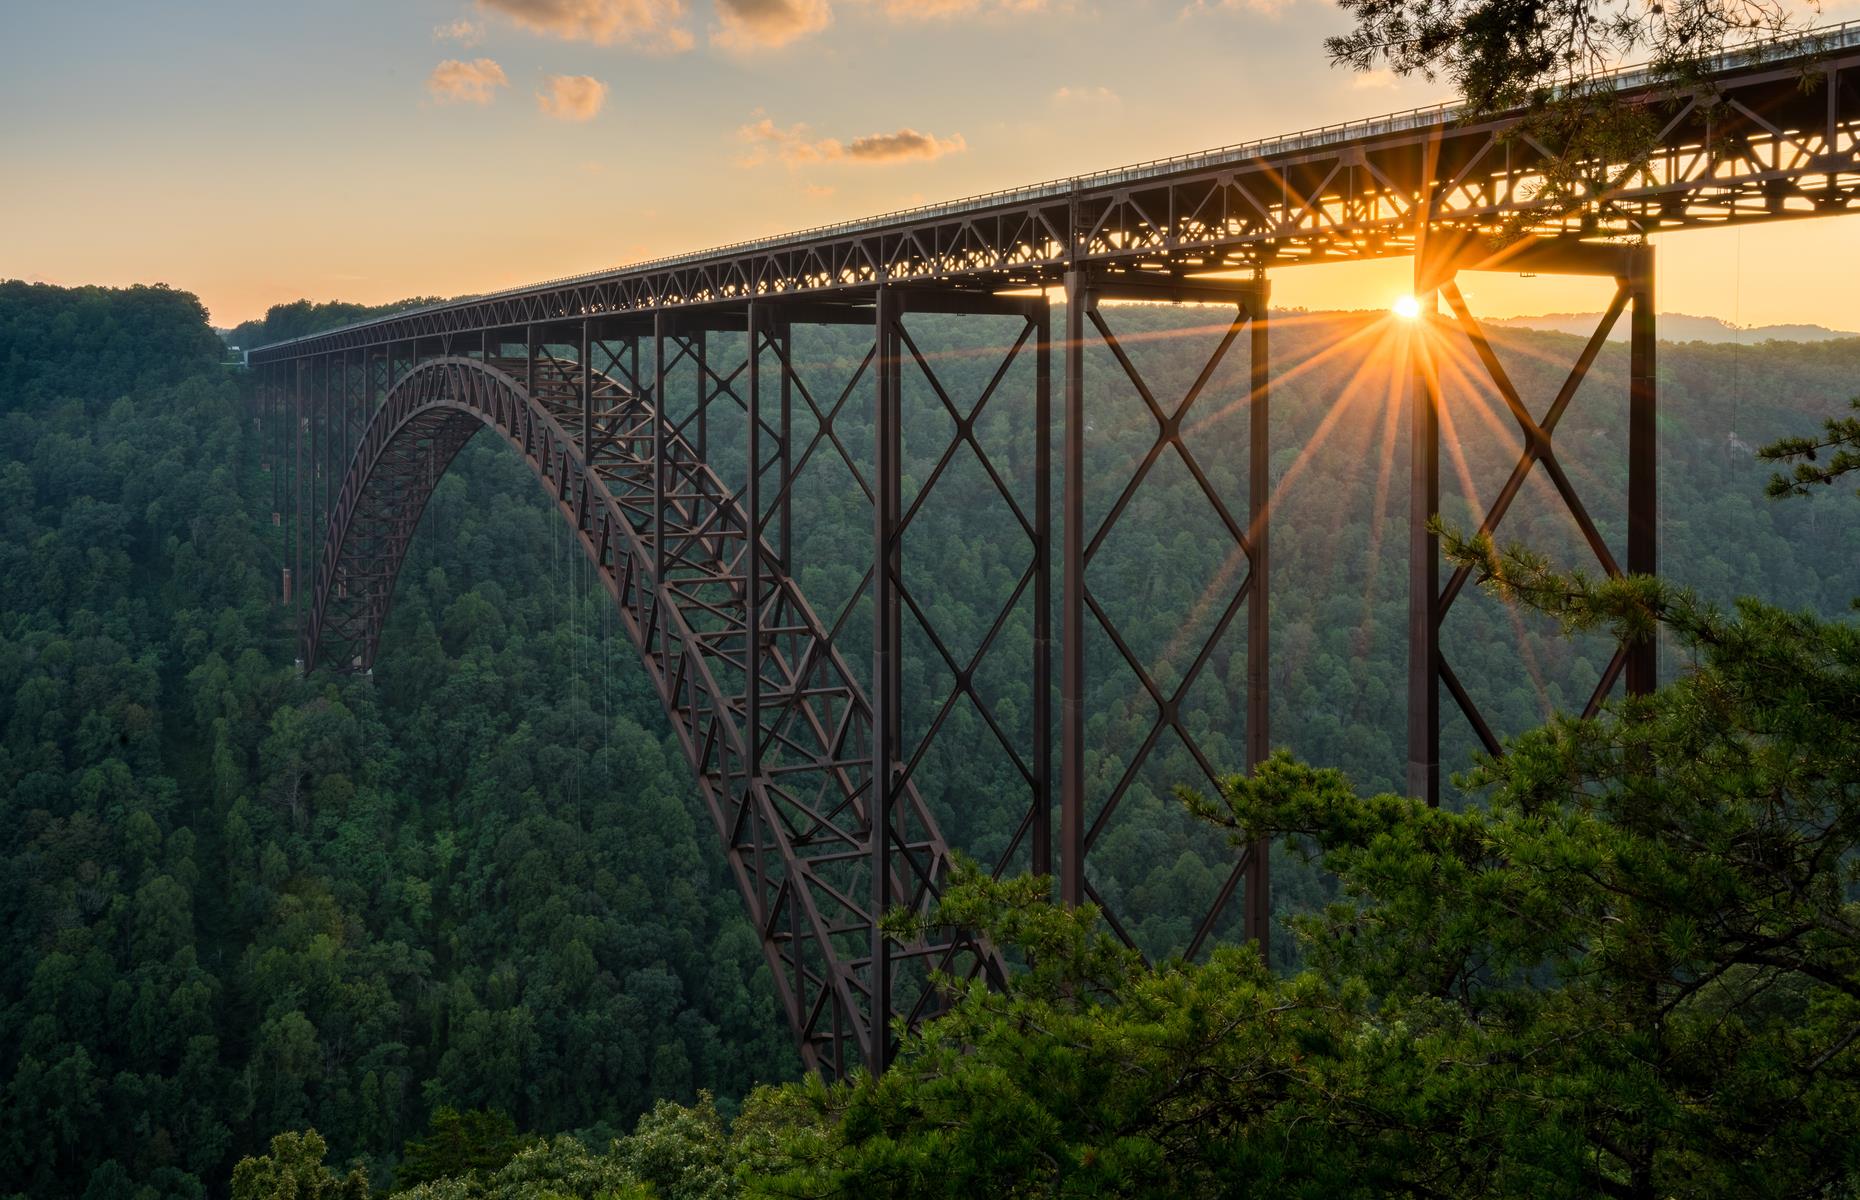 Slide 95 of 100: This enormous steel-arch bridge has spanned West Virginia’s New River Gorge since the 1970s. It's among the longest bridges of its kind in the world, and its height is dizzying: it soars about 876 feet (267m) above the waters below. The mammoth feat of engineering sits in stark contrast to the lush scenery all around. Now take a look at more impressive bridges in the USA.